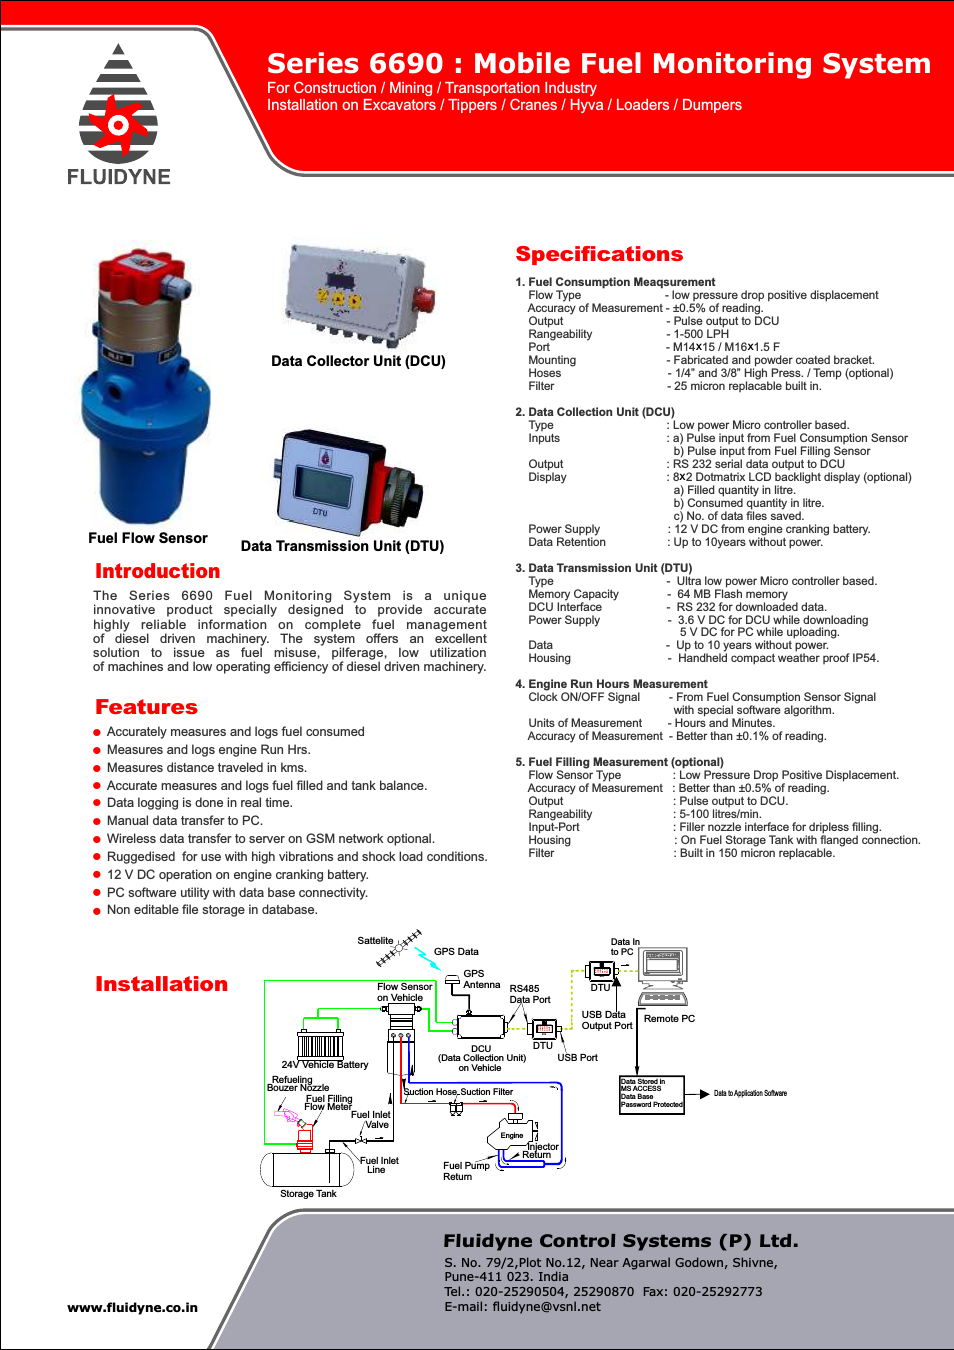 6692 Series Mobile Fuel Monitoring System